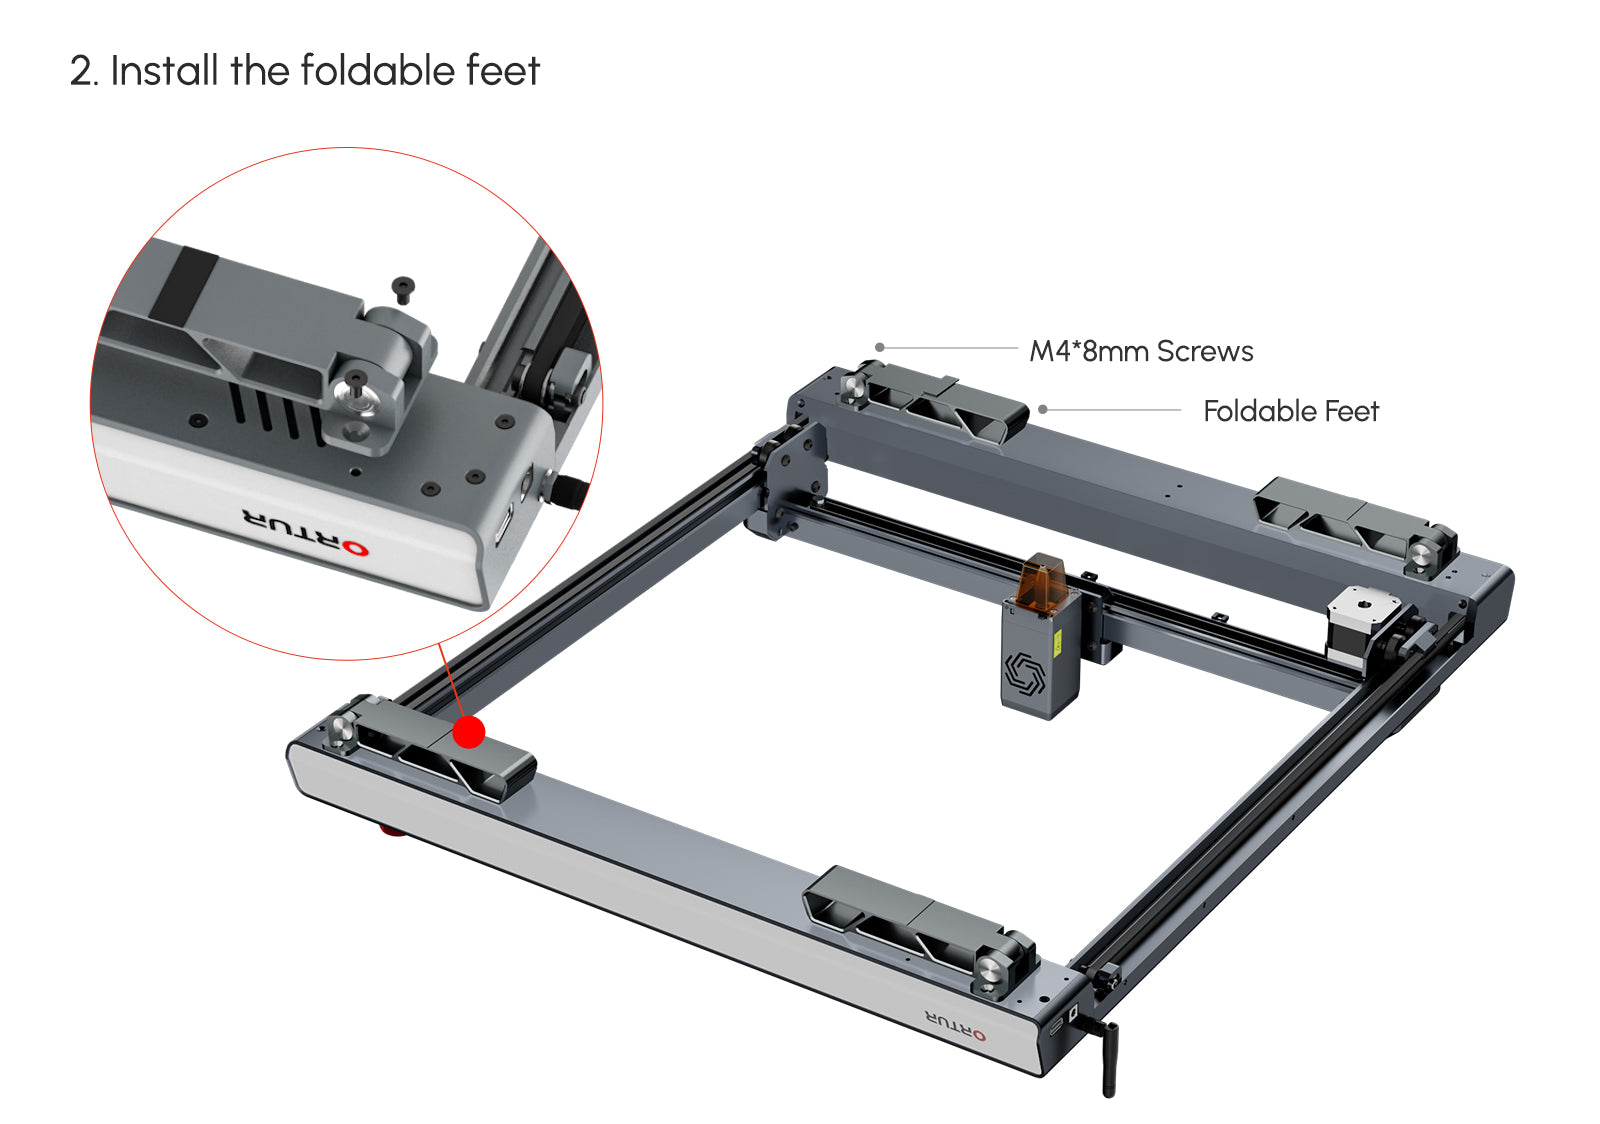 Install the Foldable Feet